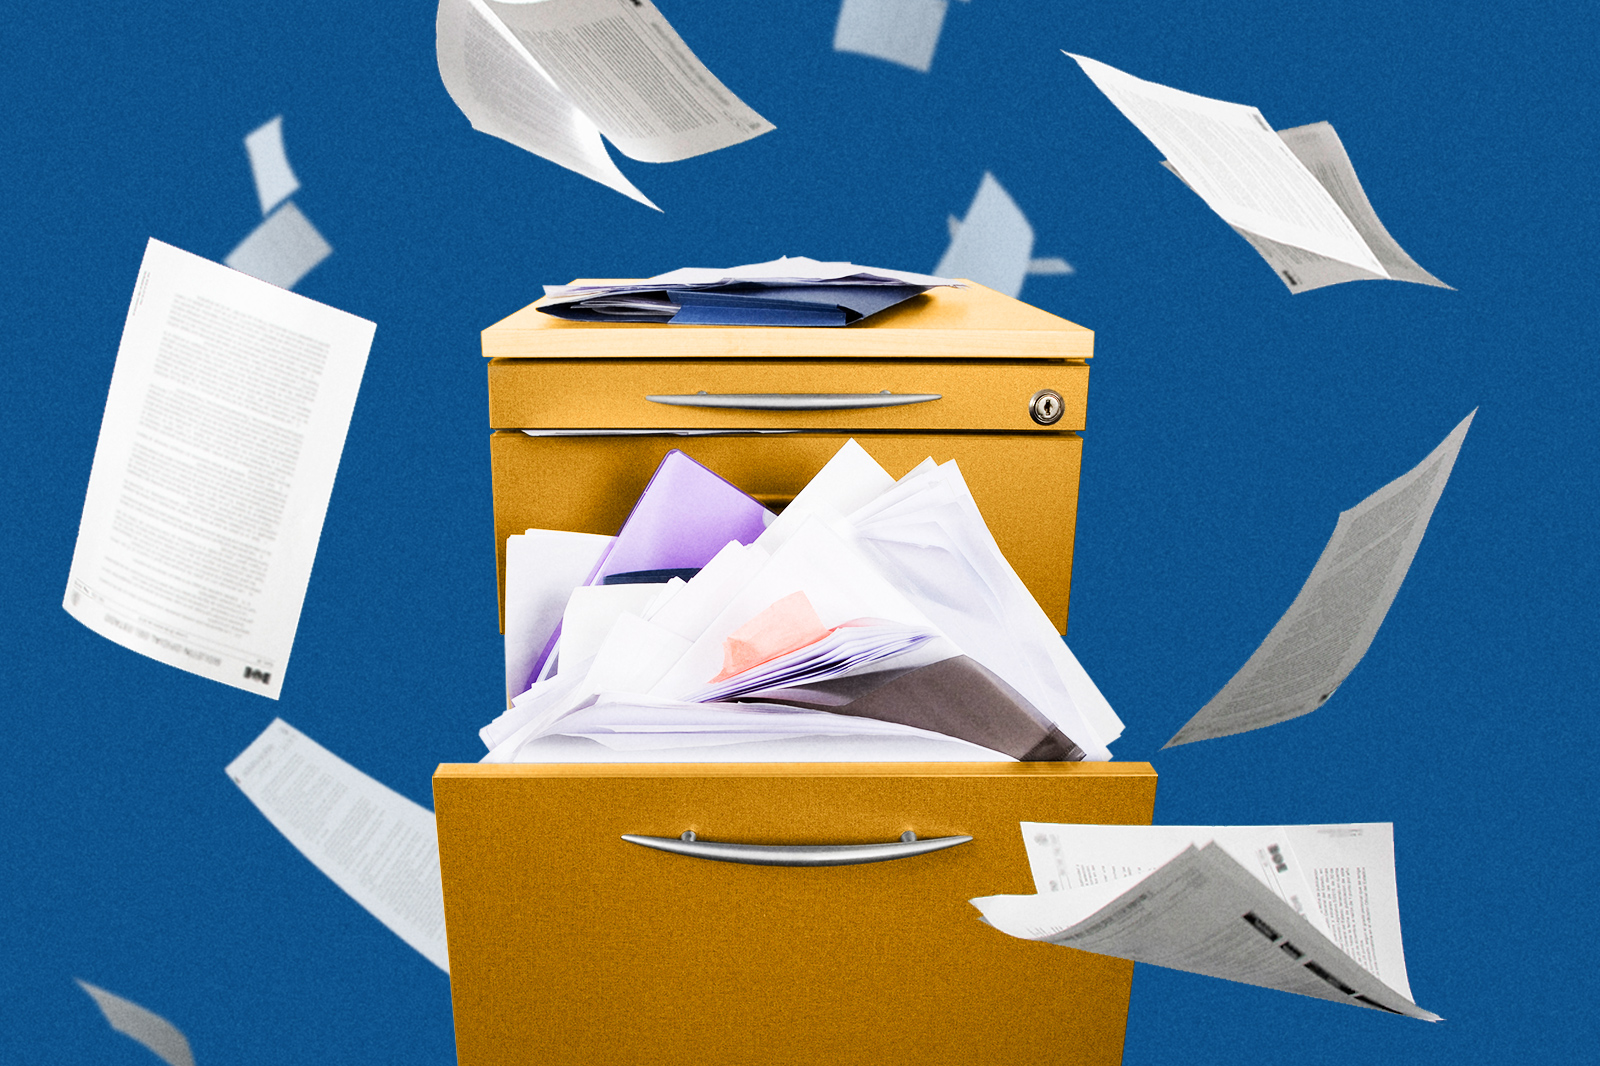 keep these 10 financial documents forever. scan and shred the rest.